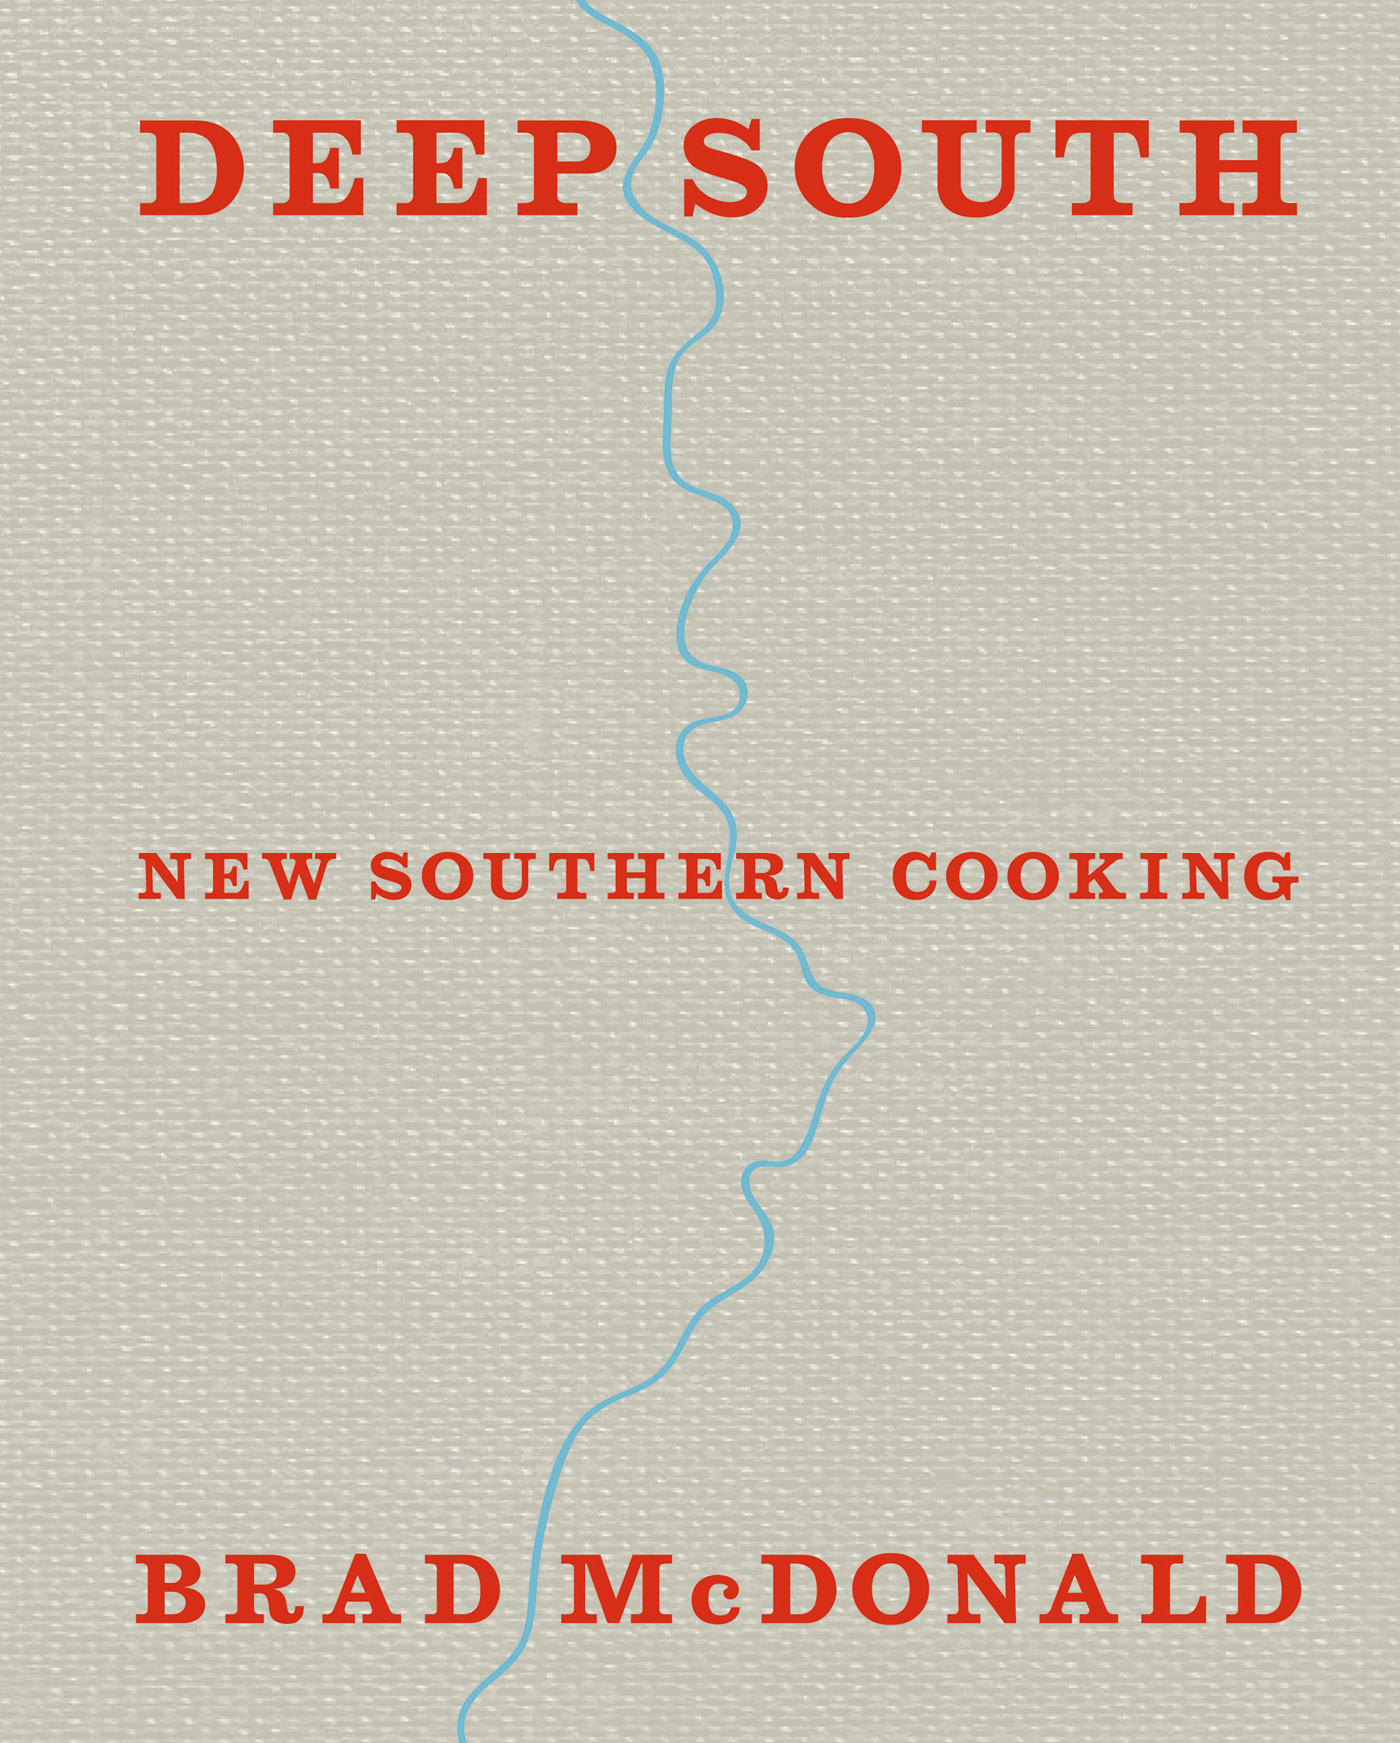 New Flavours of the Deep South New southern cooking recipes and tales from the Bayou to the Delta - photo 1